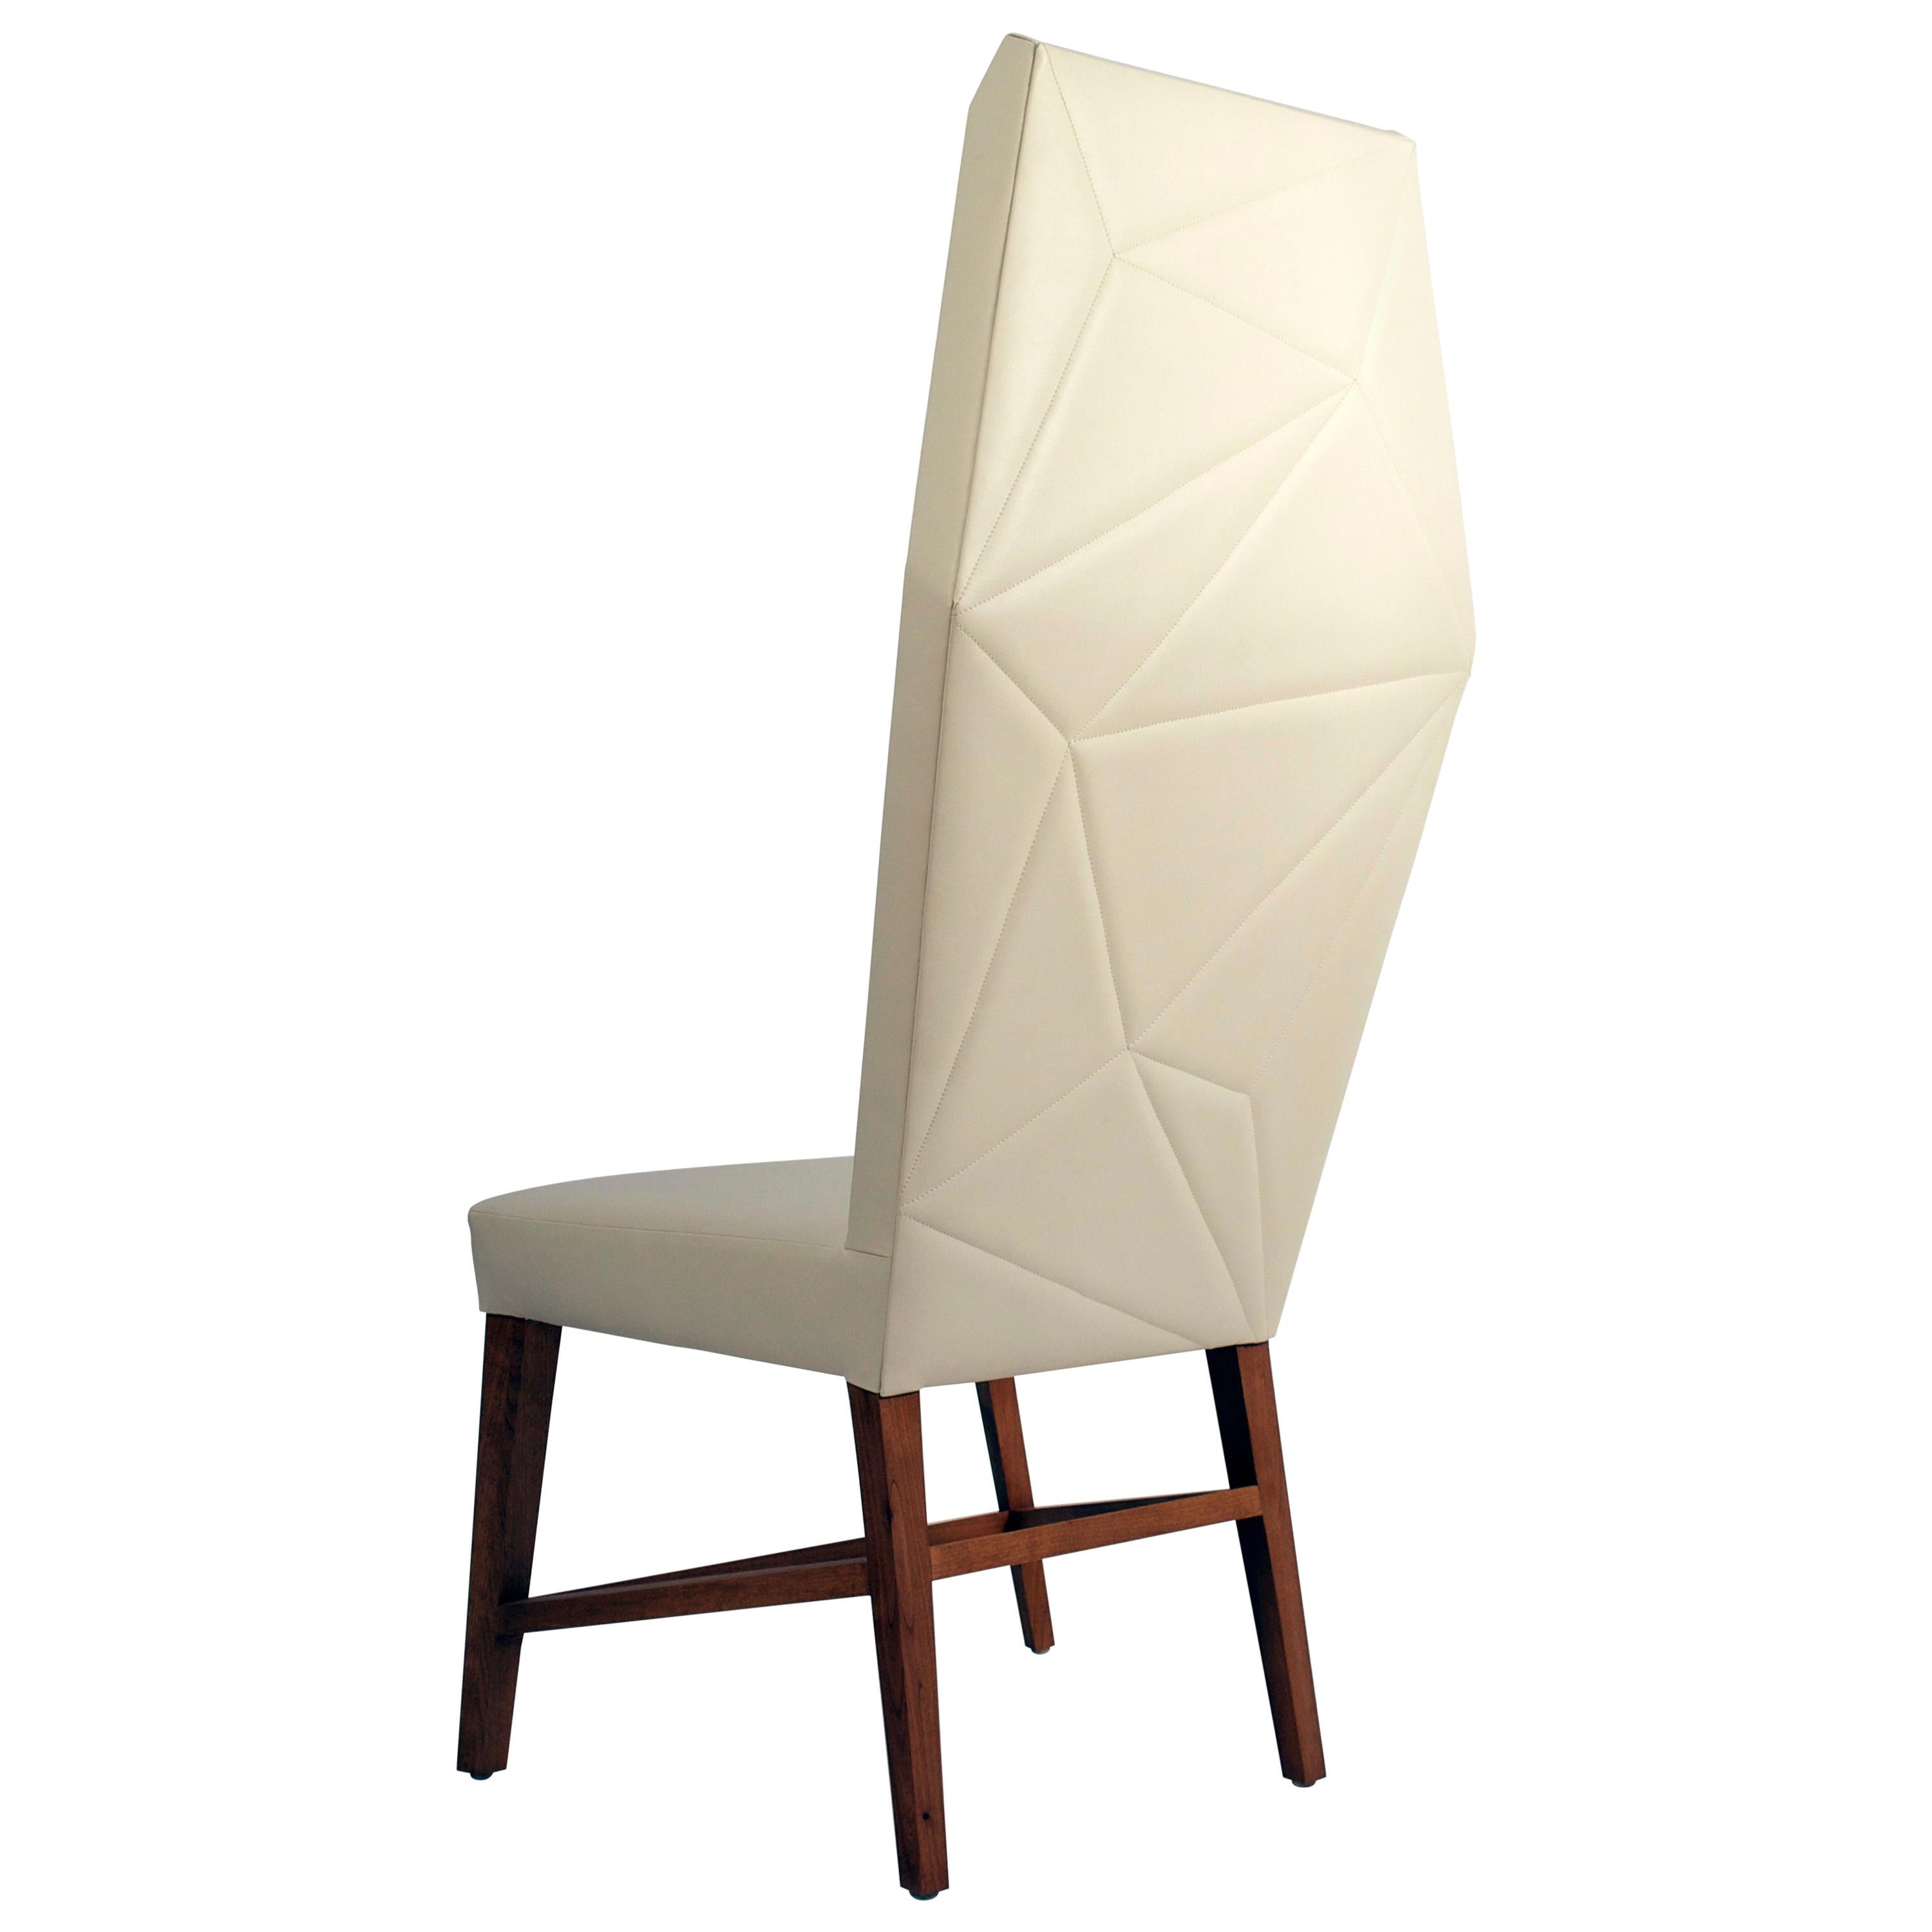 Bias Dining High Back Chair, Faceted Contemporary Design with Exposed Wood Frame For Sale